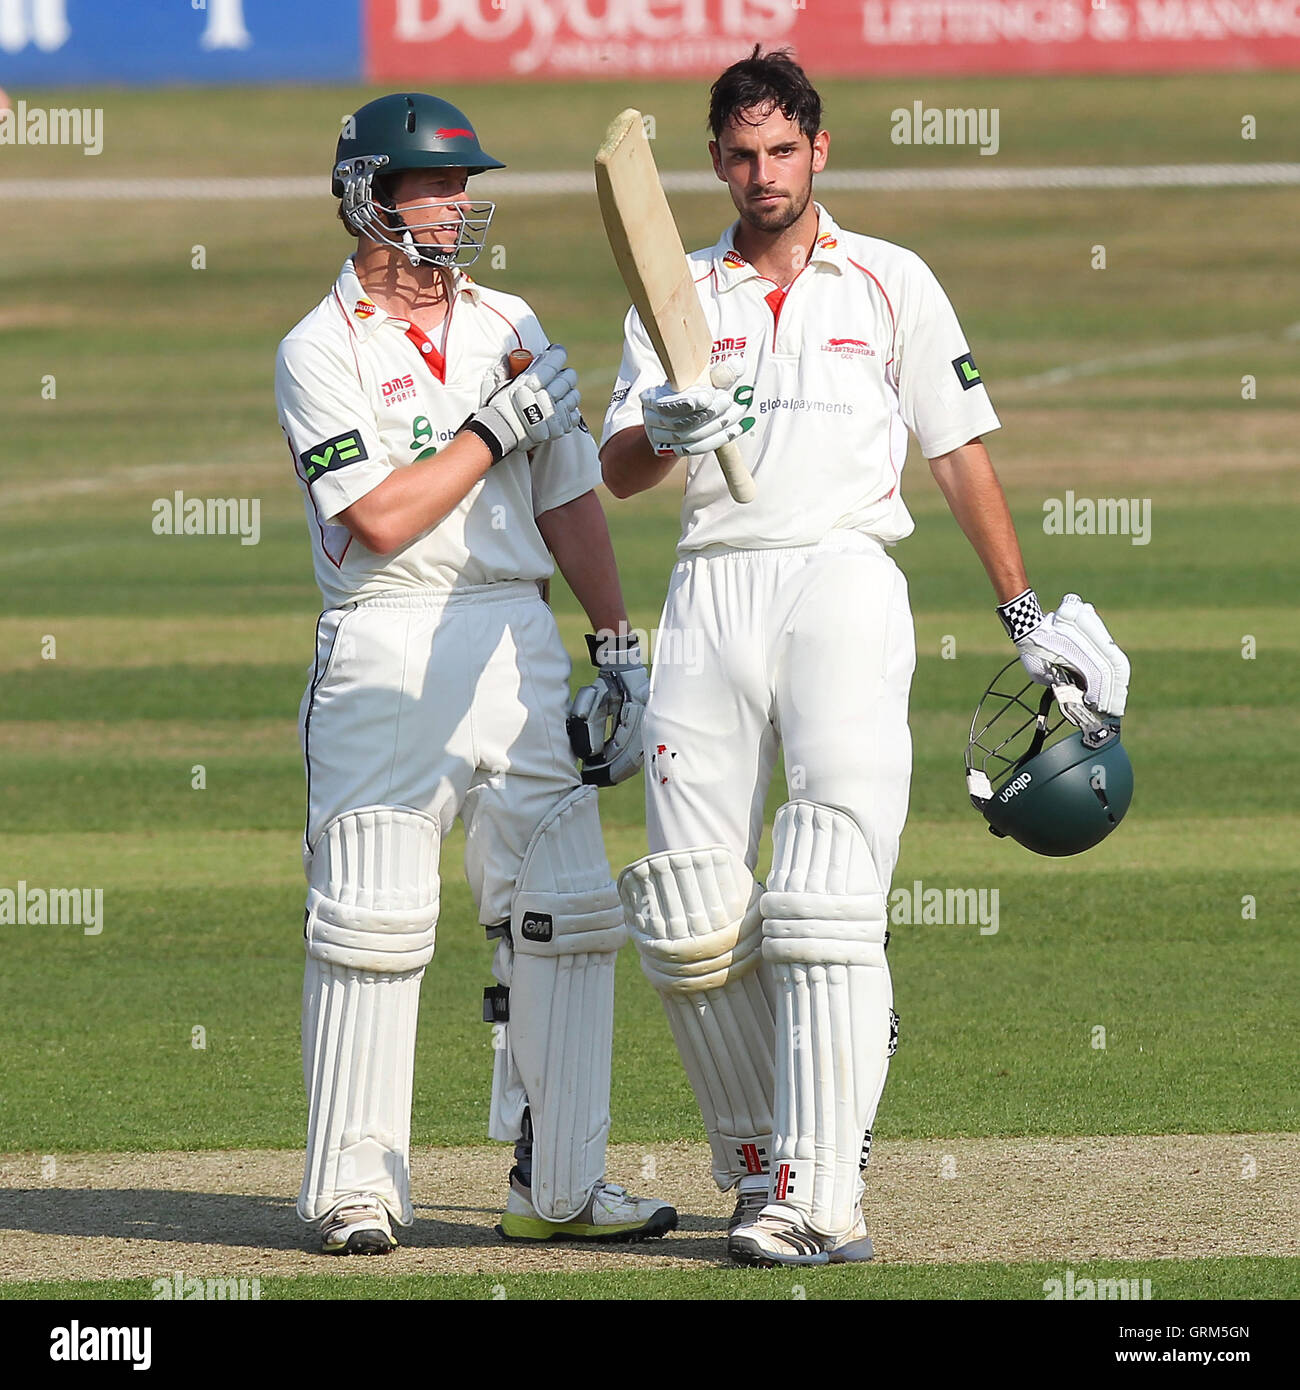 Ned Eckersley of Leicestershire celebrates a century, 100 runs for his team and is congratulated by captain Matthew Boyce (L) - Essex CCC vs Leicestershire CCC - LV County Championship Division Two Cricket at the Essex County Ground, Chelmsford - 17/07/13 Stock Photo